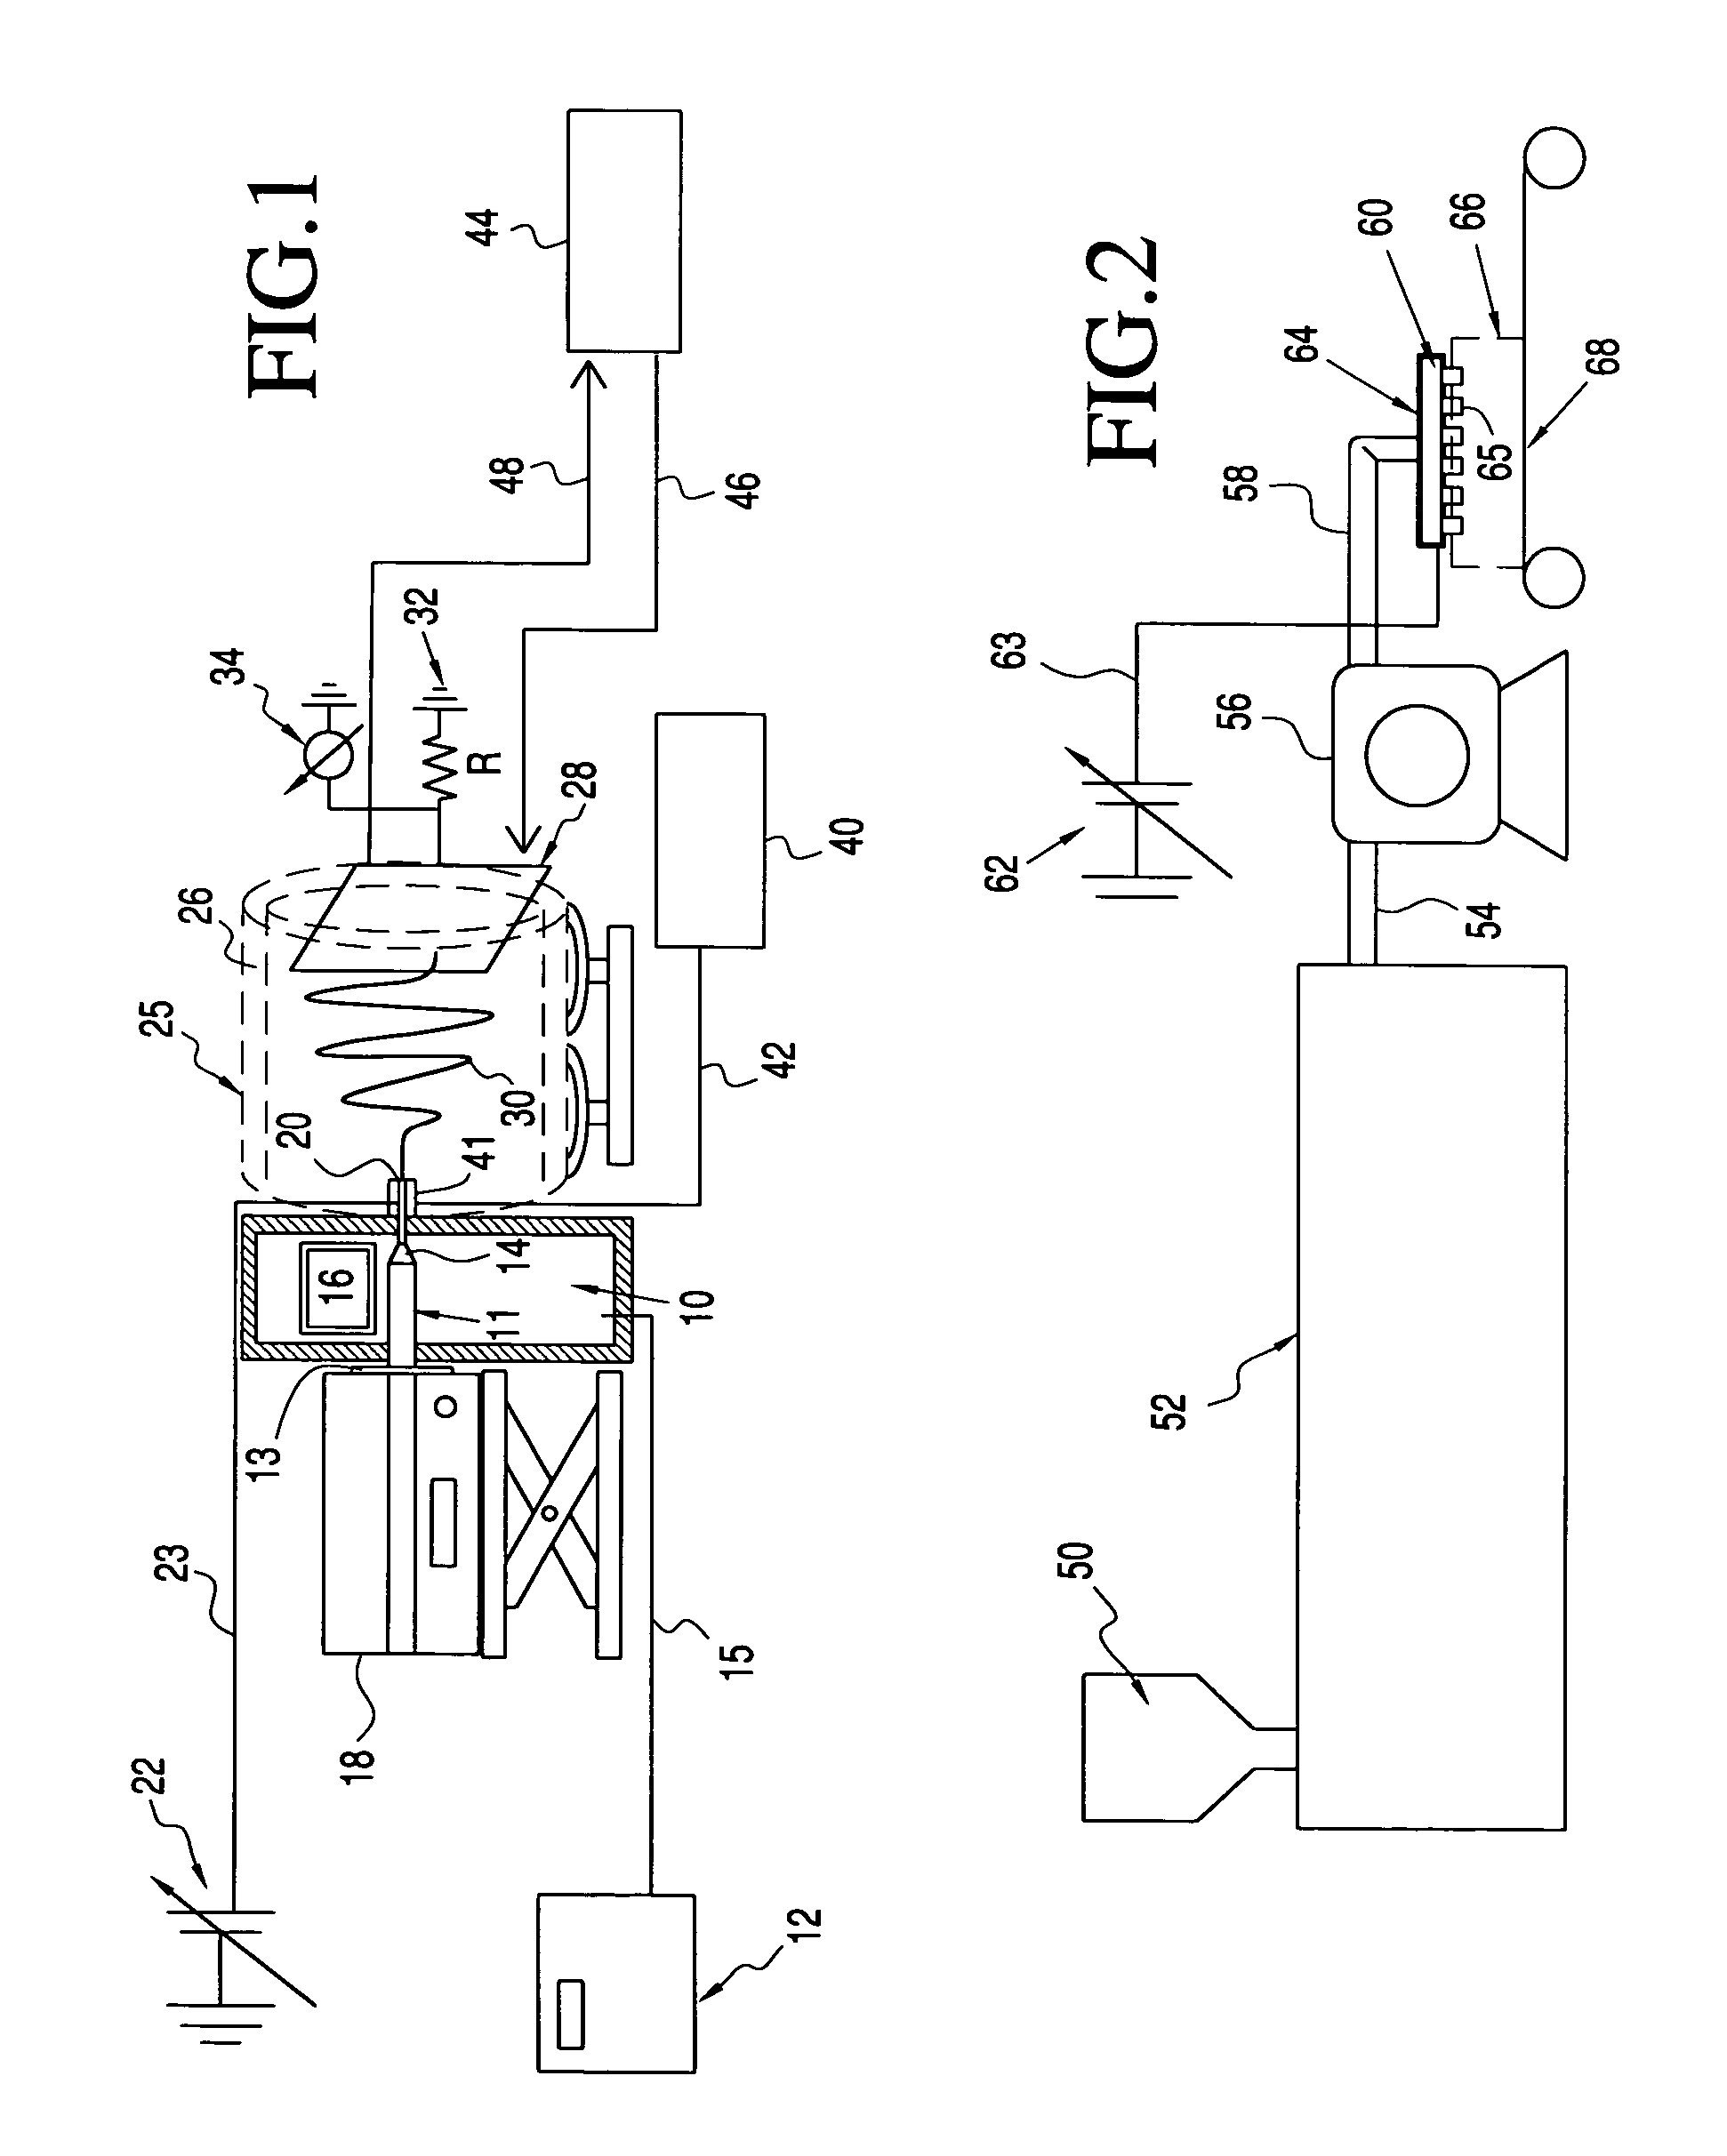 Apparatus and method for elevated temperature electrospinning